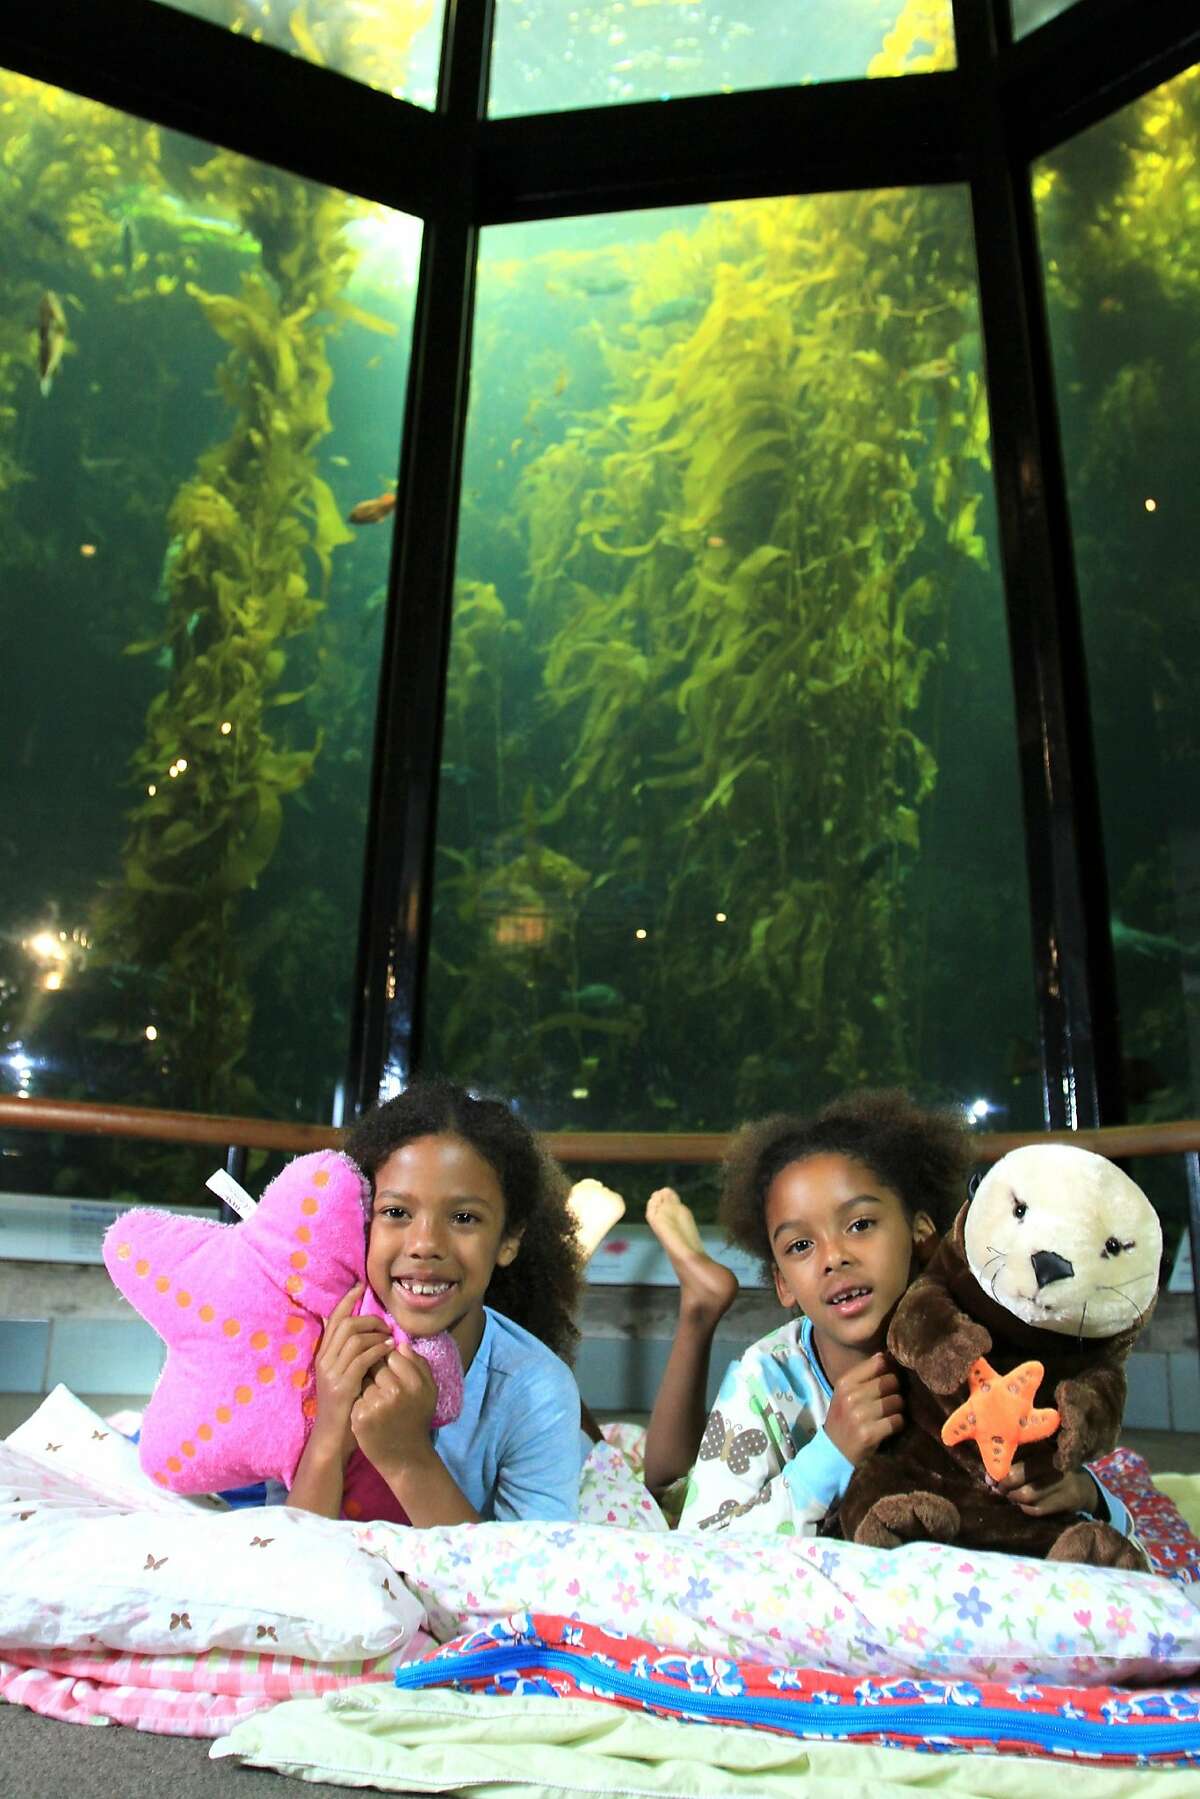 Families can greet the new year with the denizens of the Monterey Bay Aquarium by joining the New Year's Eve Seashore Sleepover.